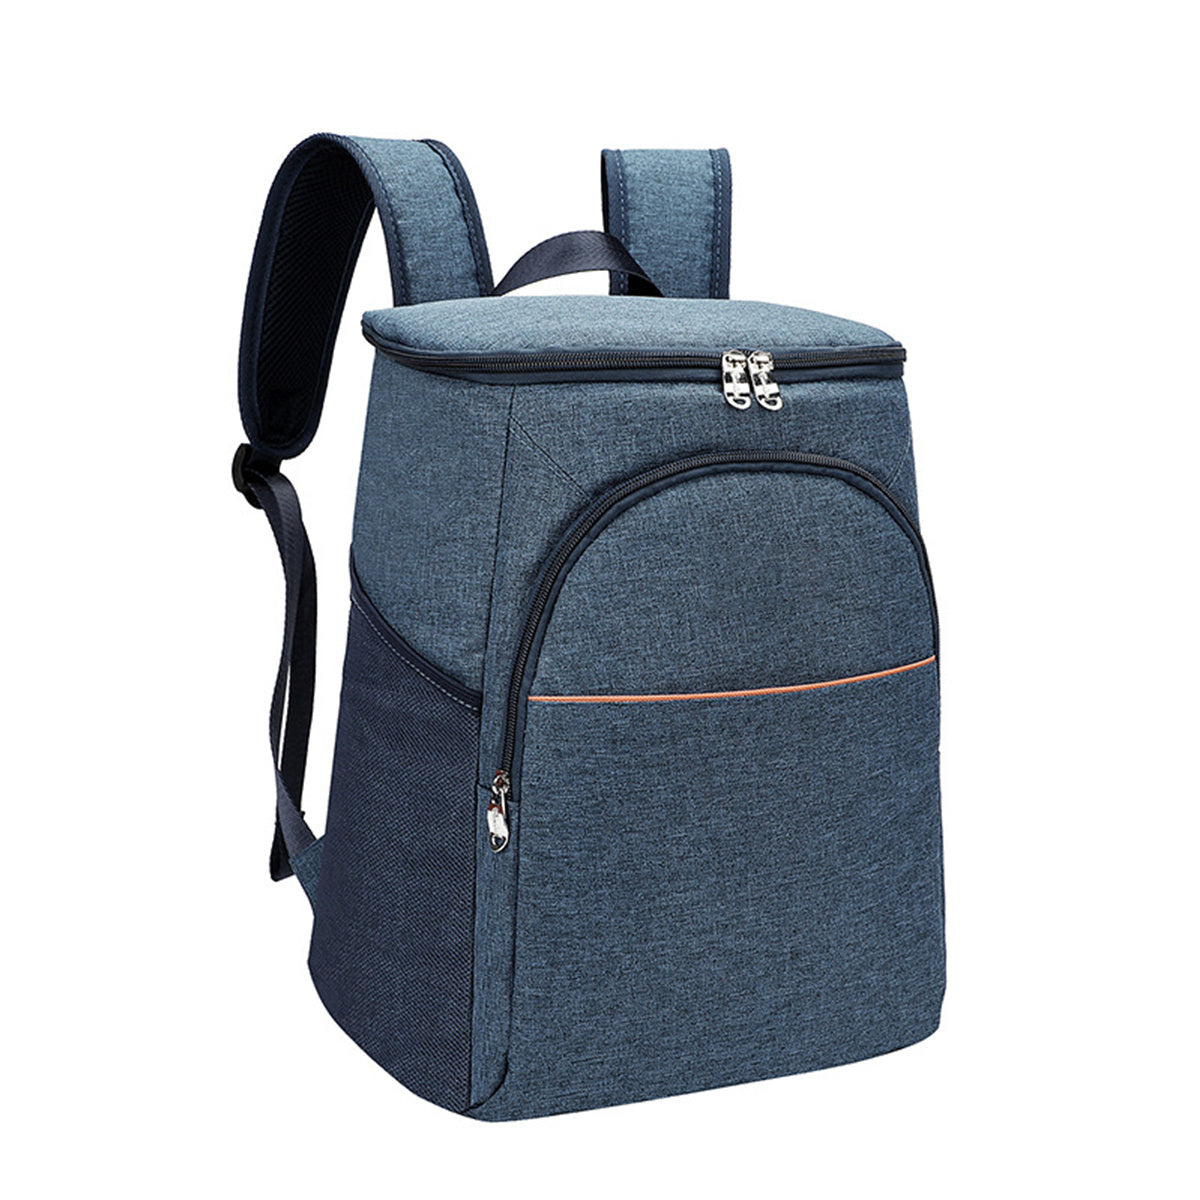 Insulated and Leak-Proof Picnic Bag With Thick Shoulders